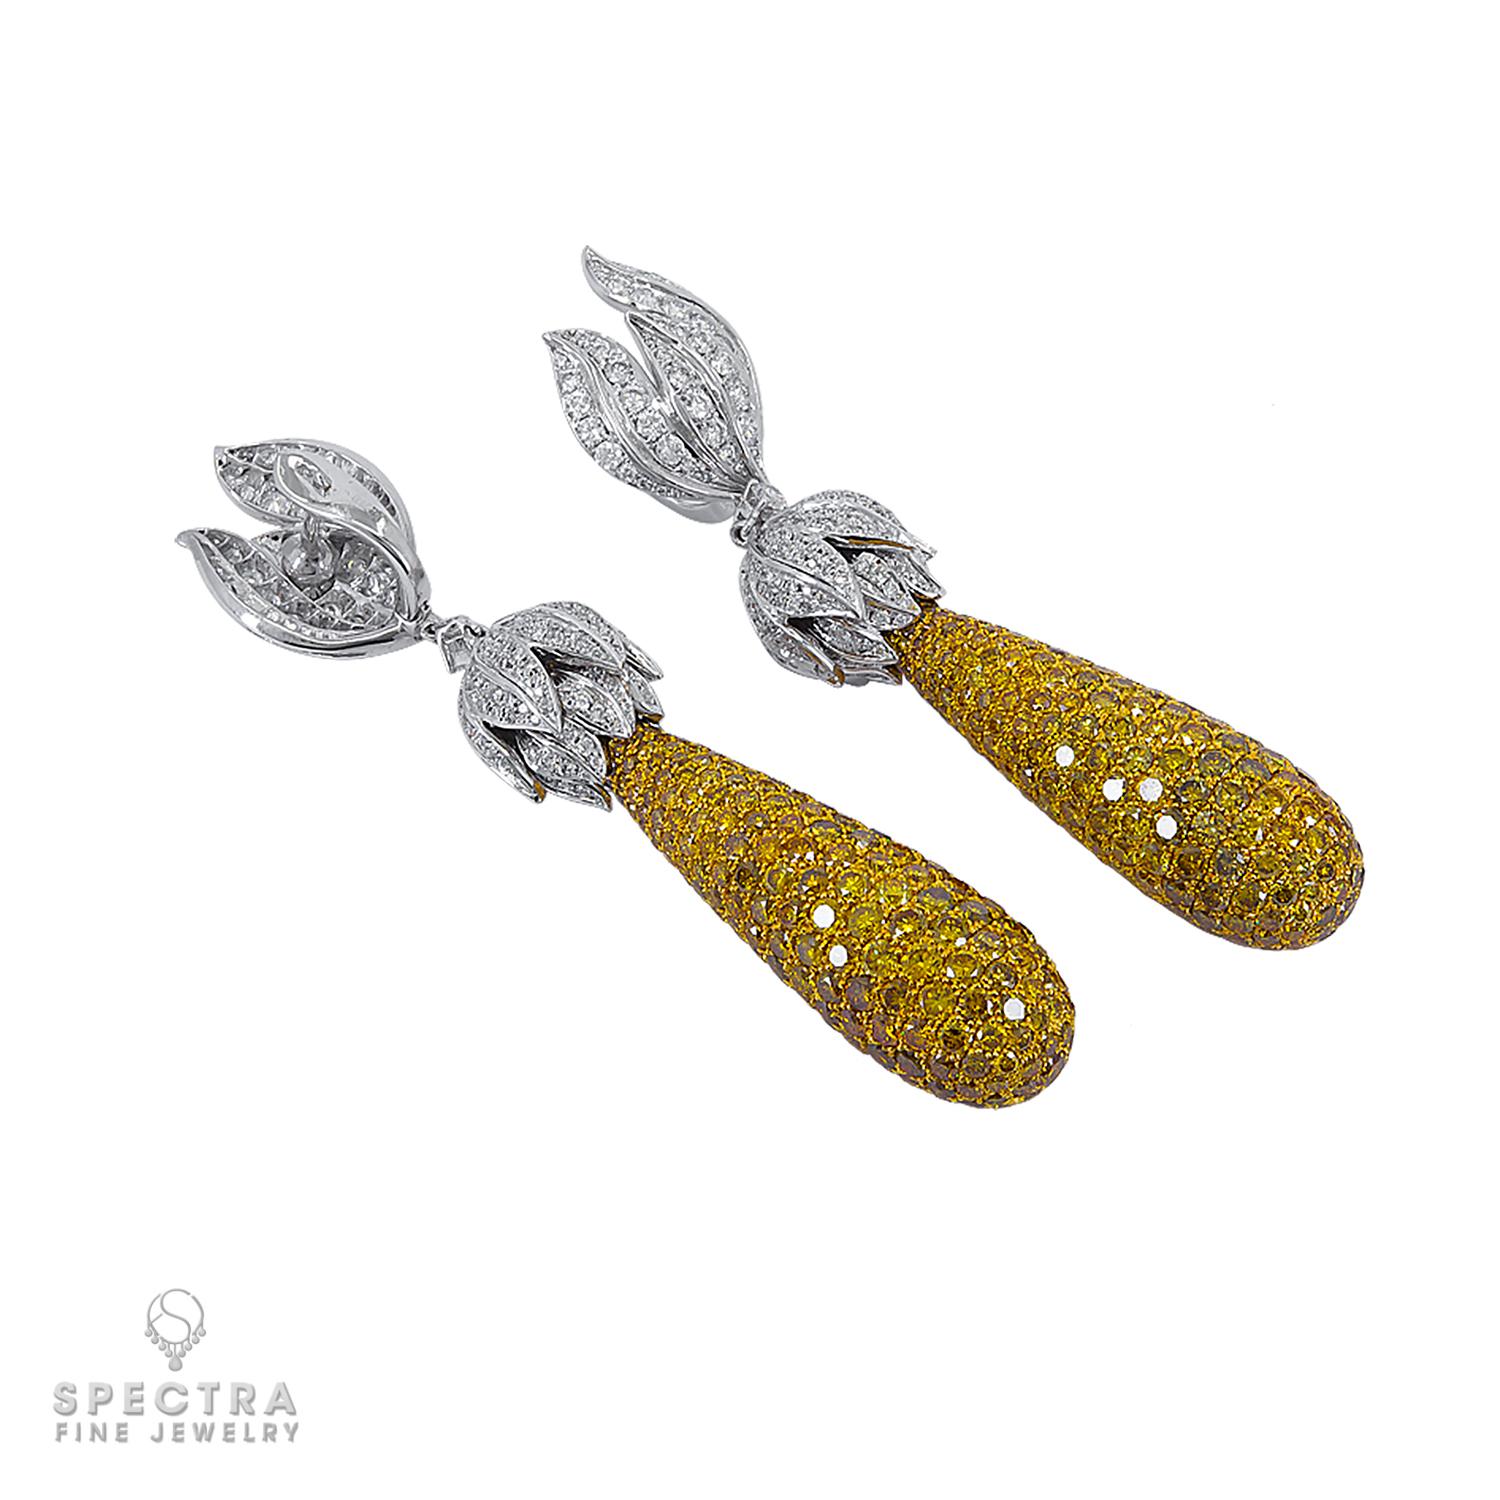 If there were a stylized, jeweled depiction of the great The Winged Victory of Samothrace, a masterpiece of Greek Hellenistic art and one of the most famous sculptures at the Louvre, these White and Yellow Diamond Drop Earrings with an estimated